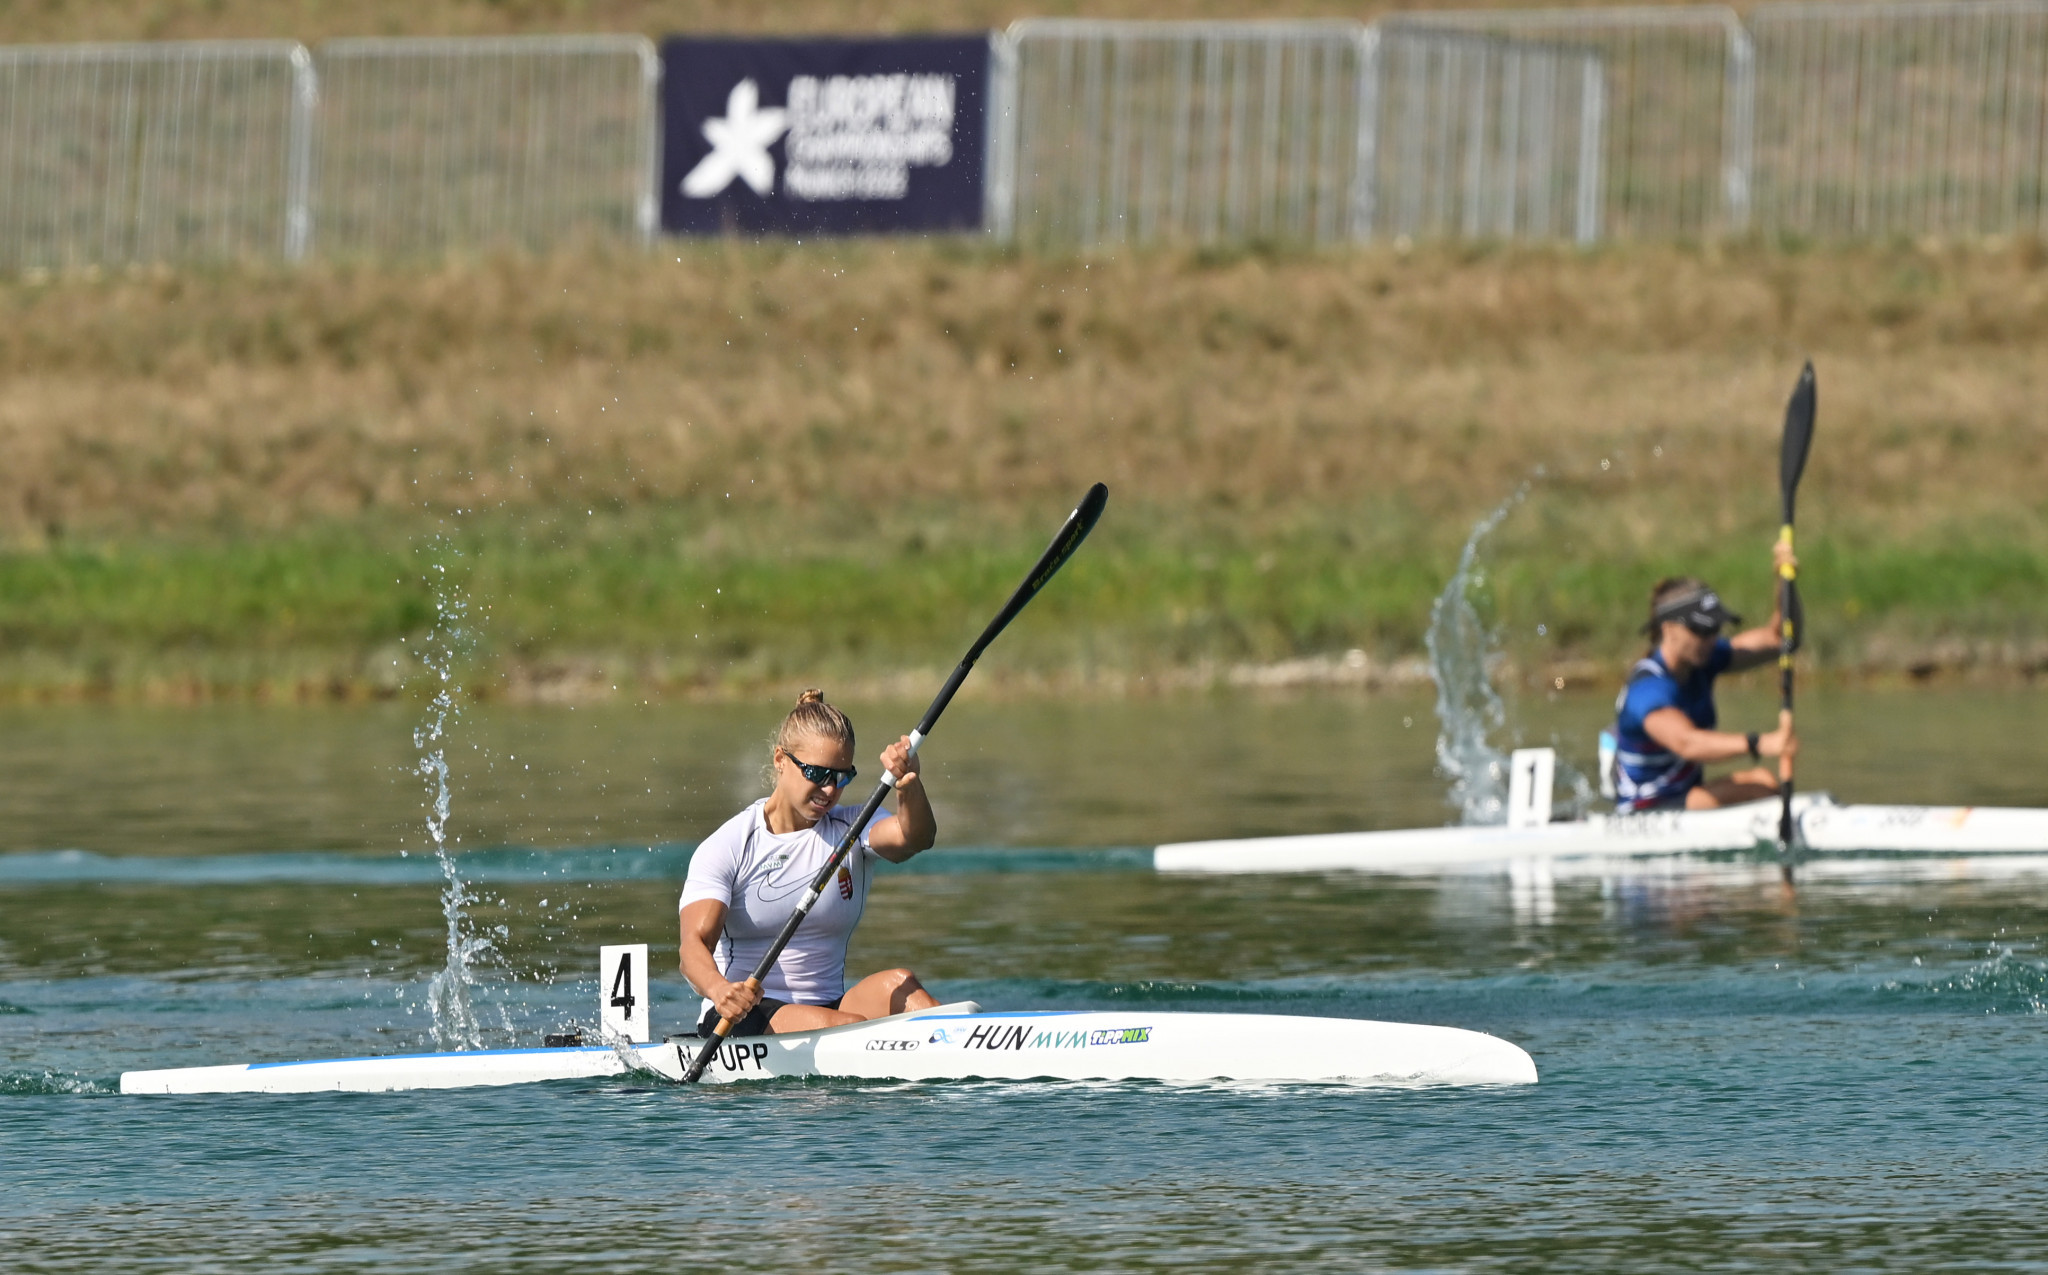 Noemi Pupp, left, narrowly won the women's K1 1,000m final for Hungary ©Getty Images